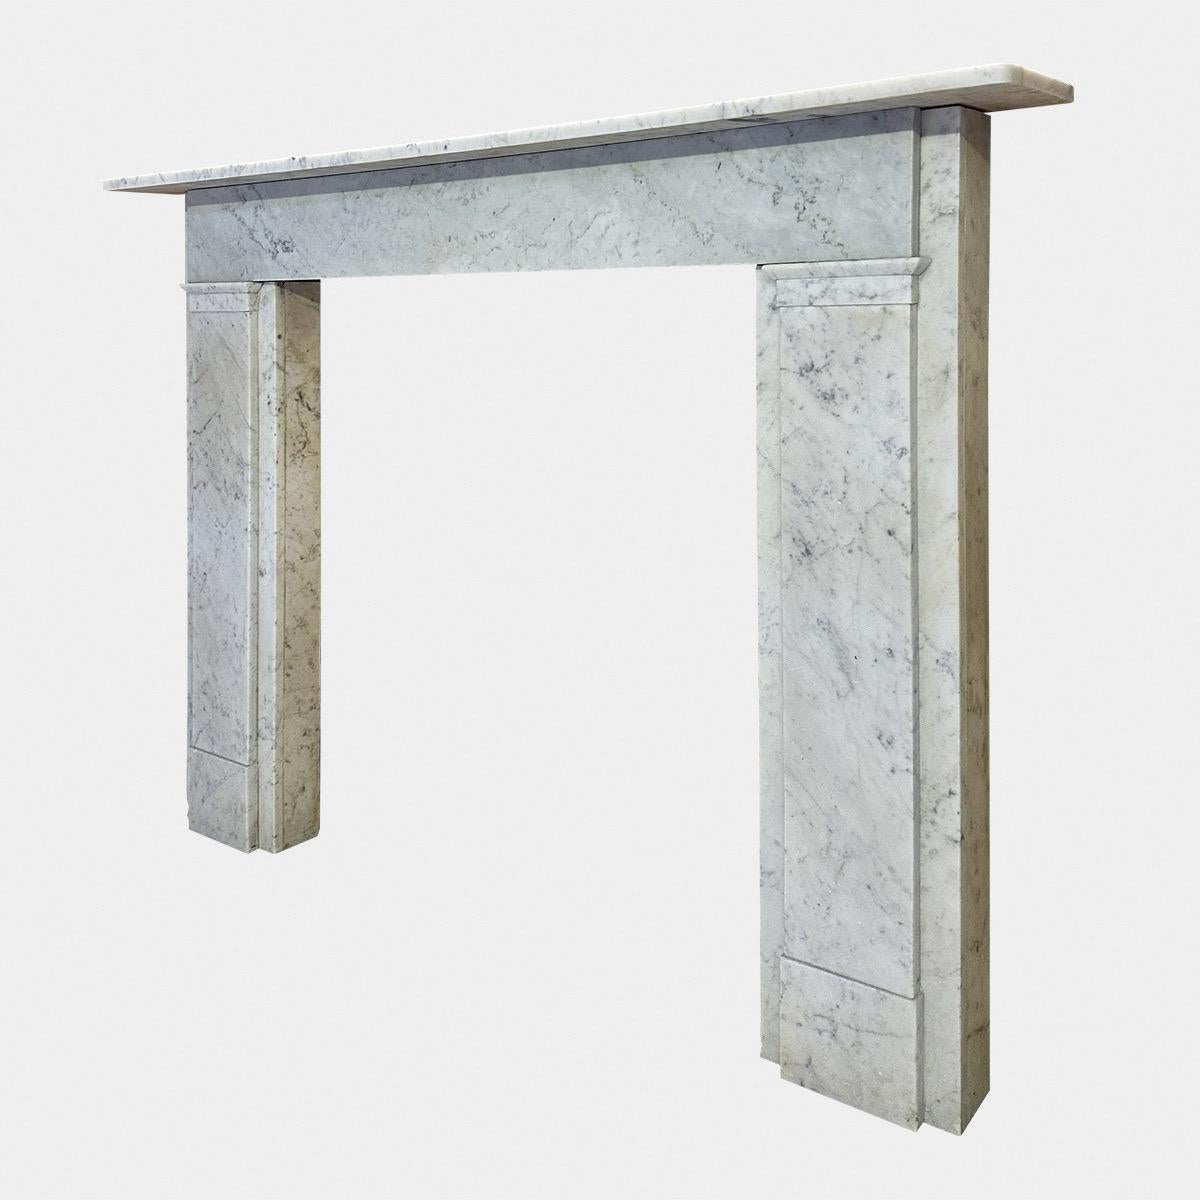 A Large English William IV period Carrara marble fireplace surround. The wide pilaster jambs with slim panel to centre. The long running frieze from side to side under a large simple mantel. A nice example of this period of surround, from the